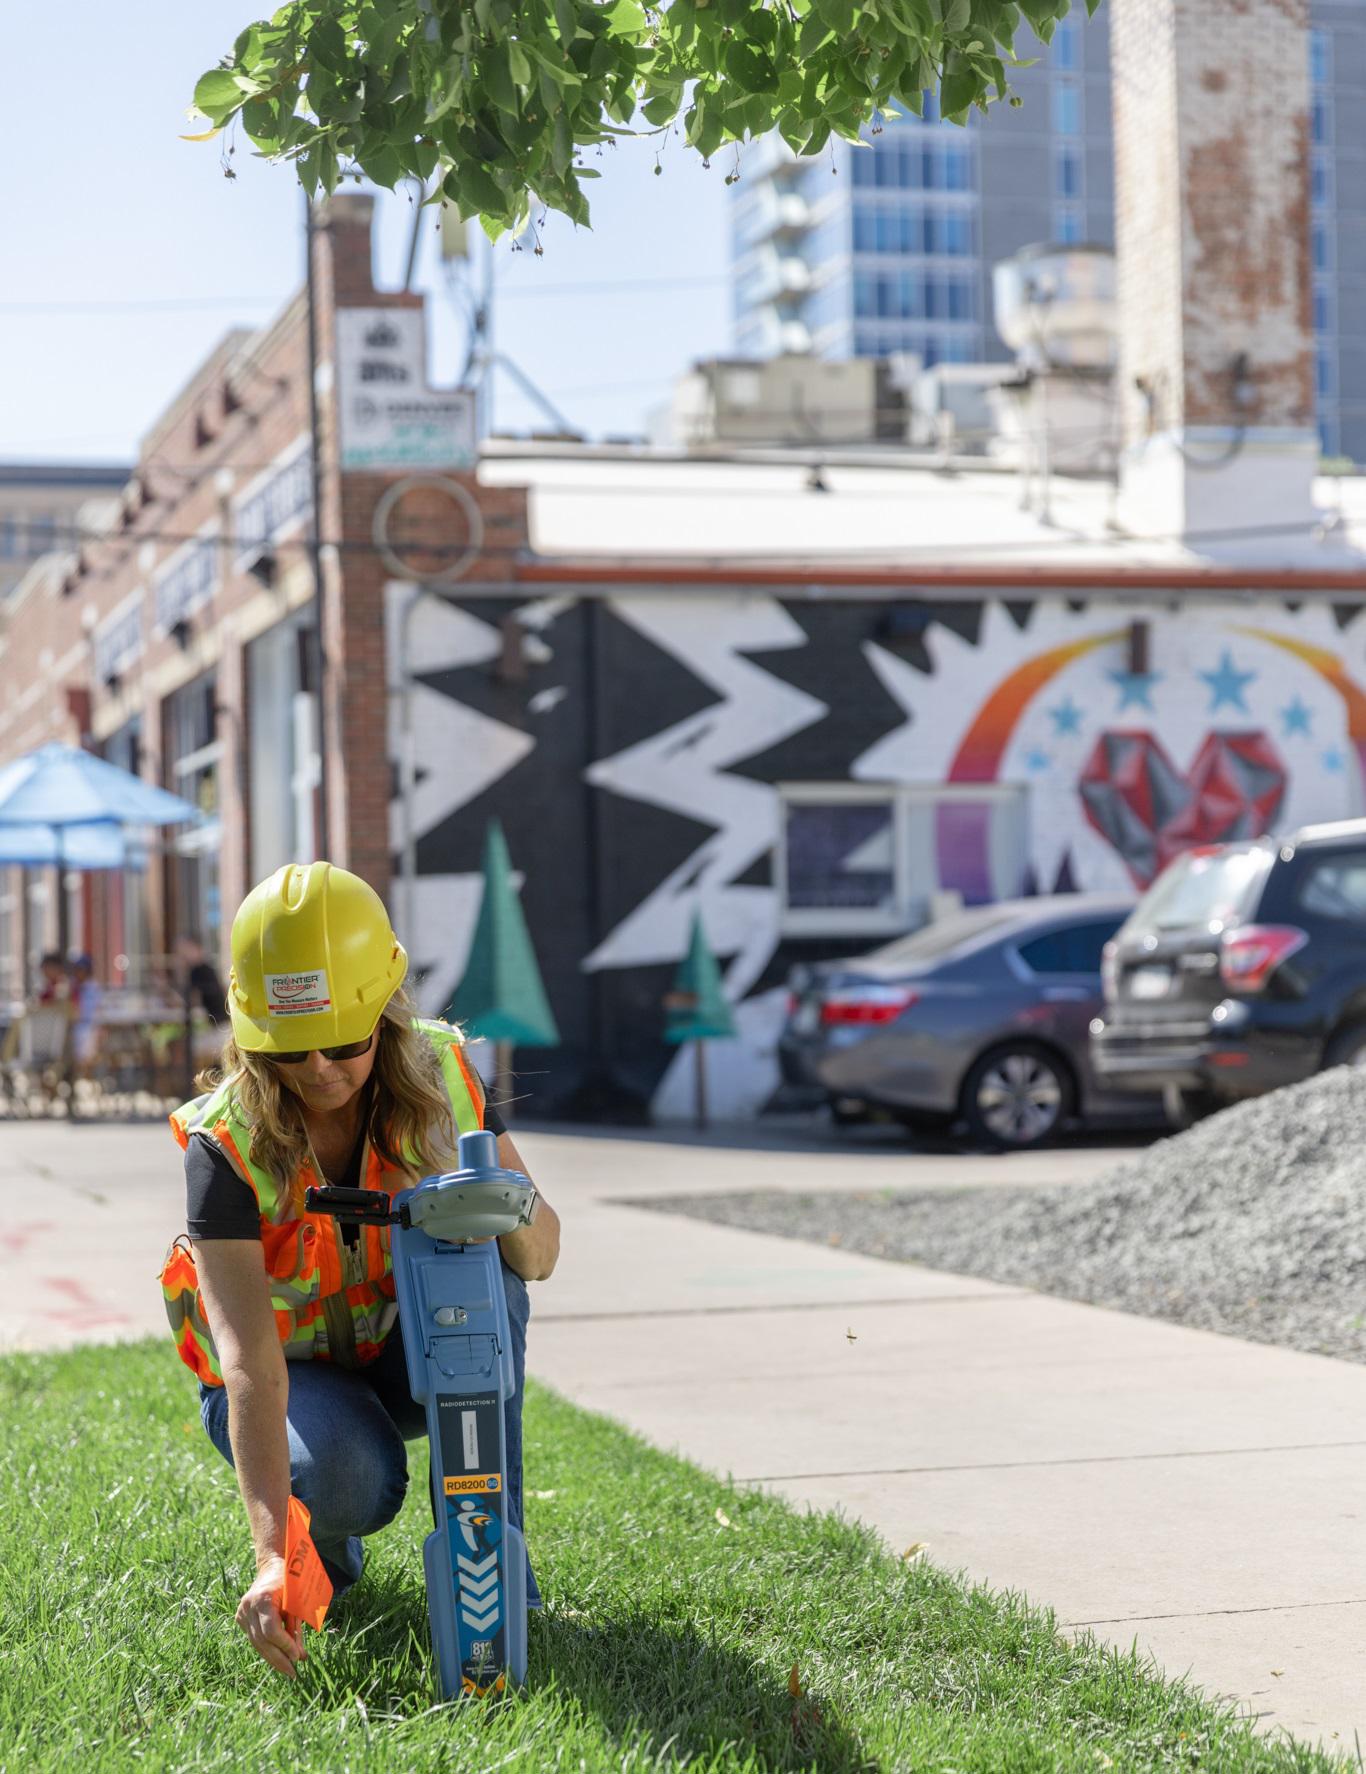 A woman surveying, in a high-visibility jacket and hard hat, kneeling on a sunny street